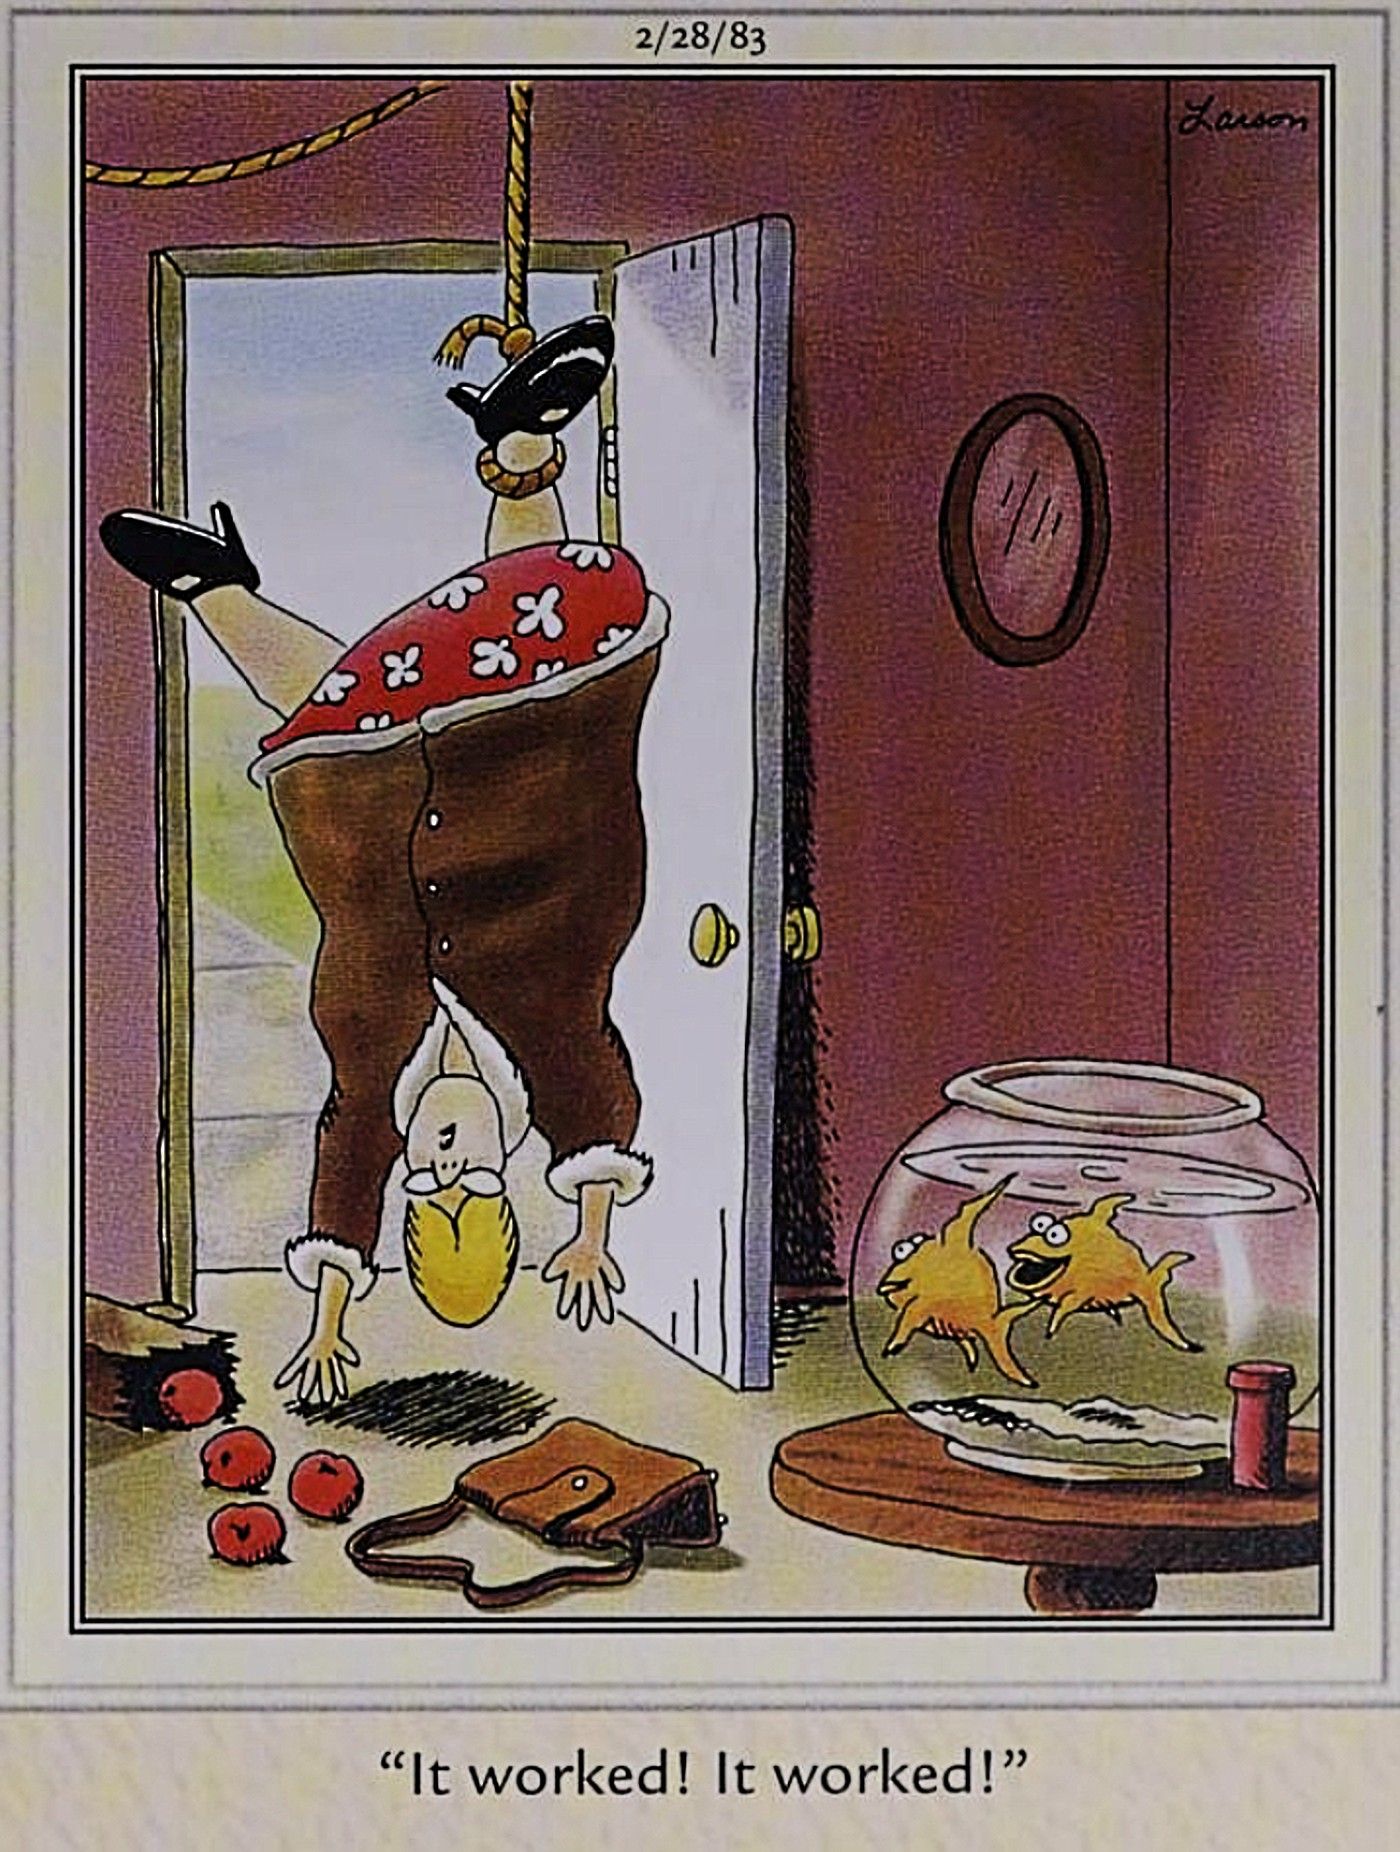 Far Side, pet gold fish snare their owner in a booby trap